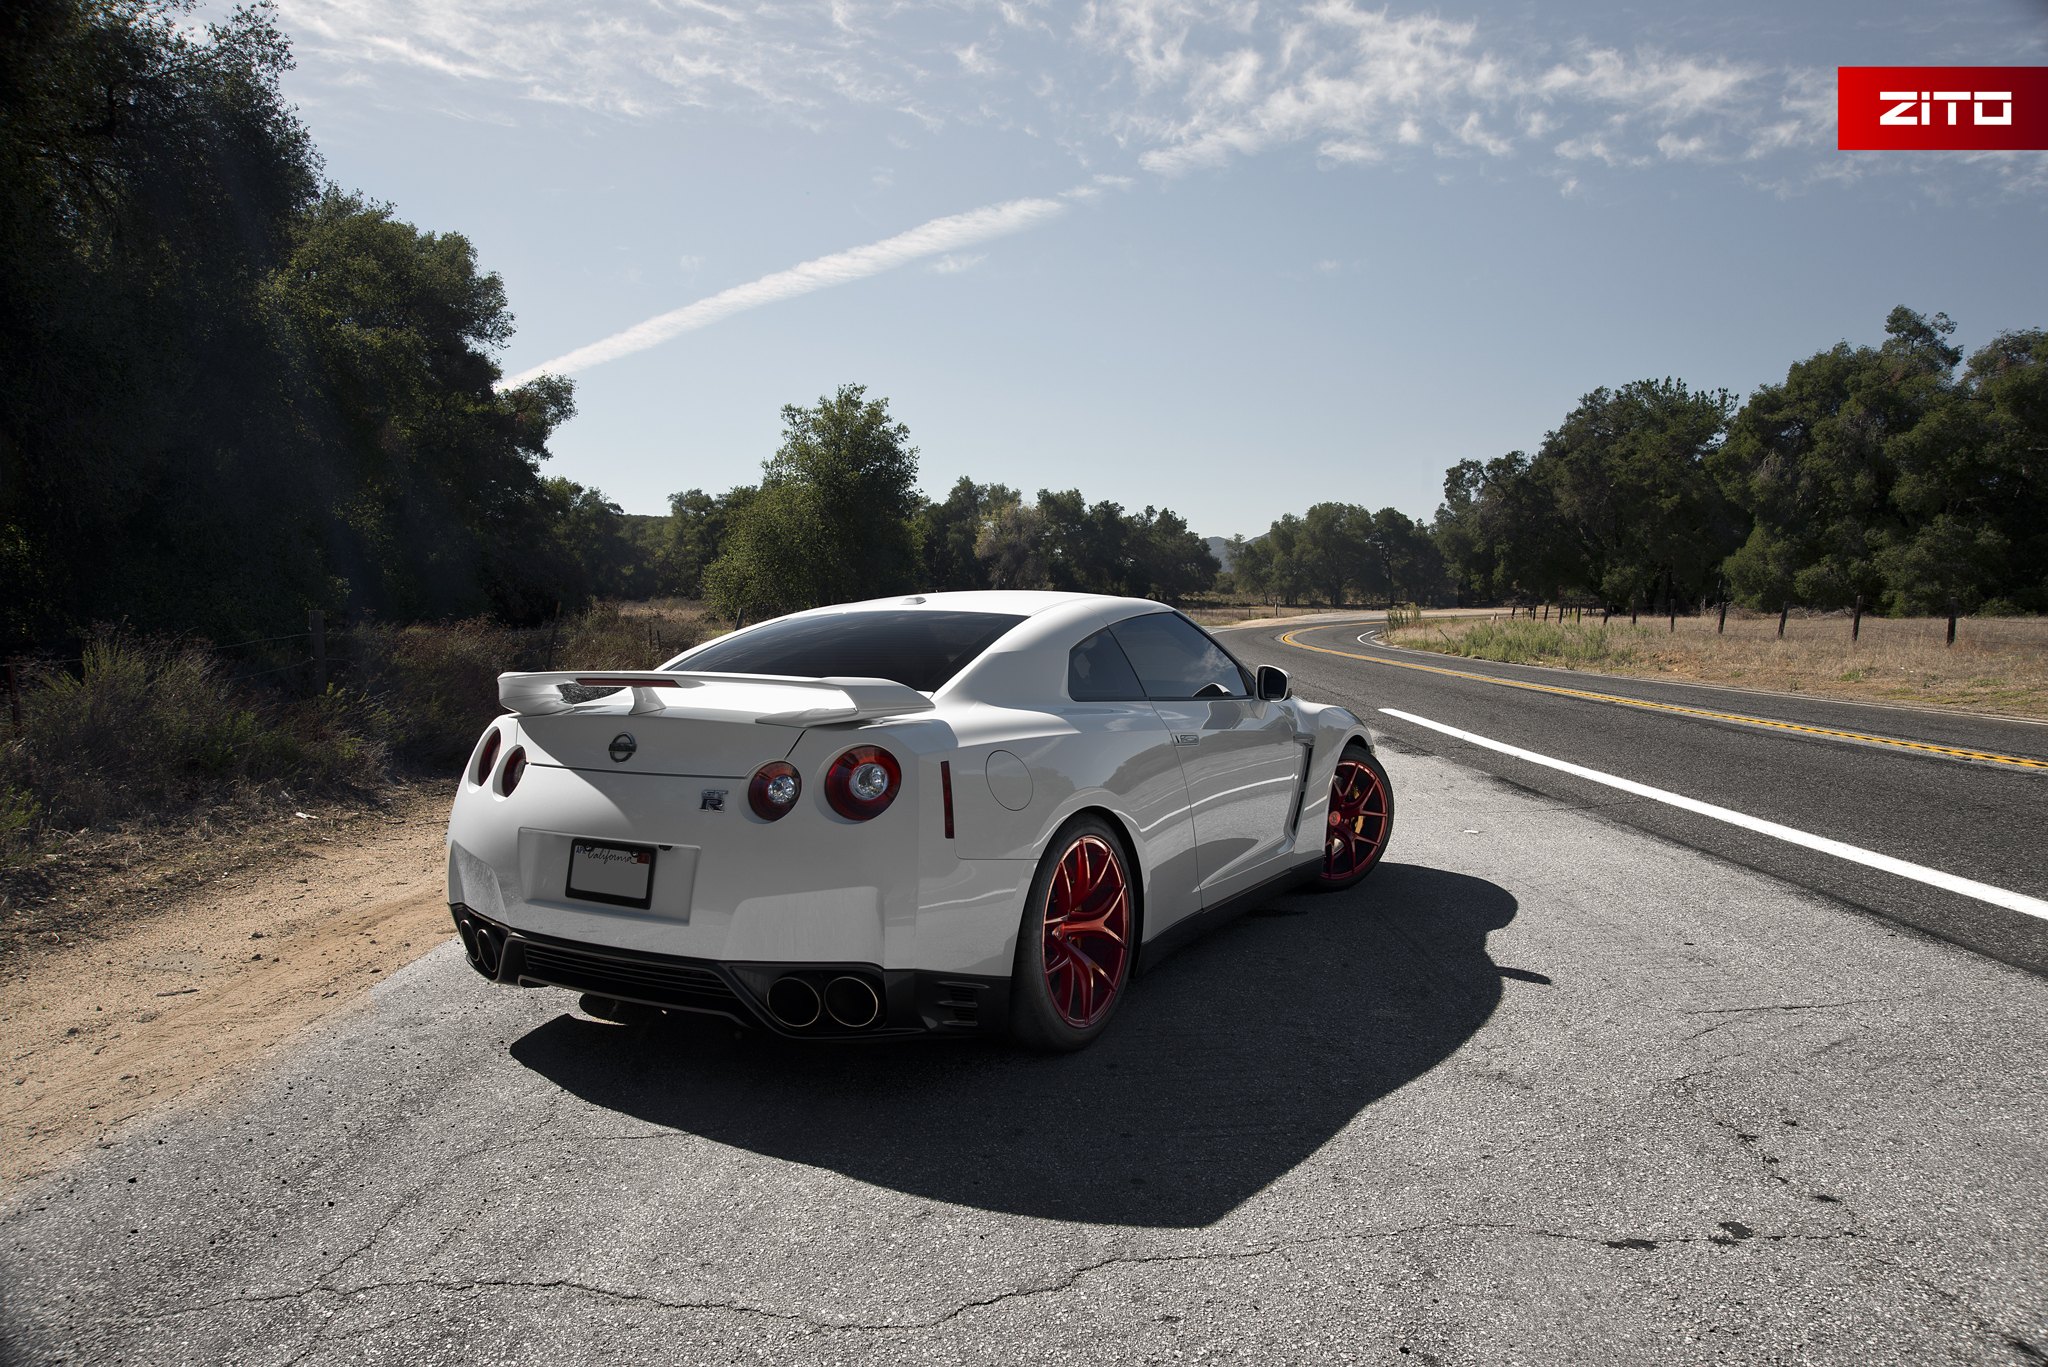 White Nissan GT-R with Aftermarket Rear Spoiler - Photo by Zito Wheels